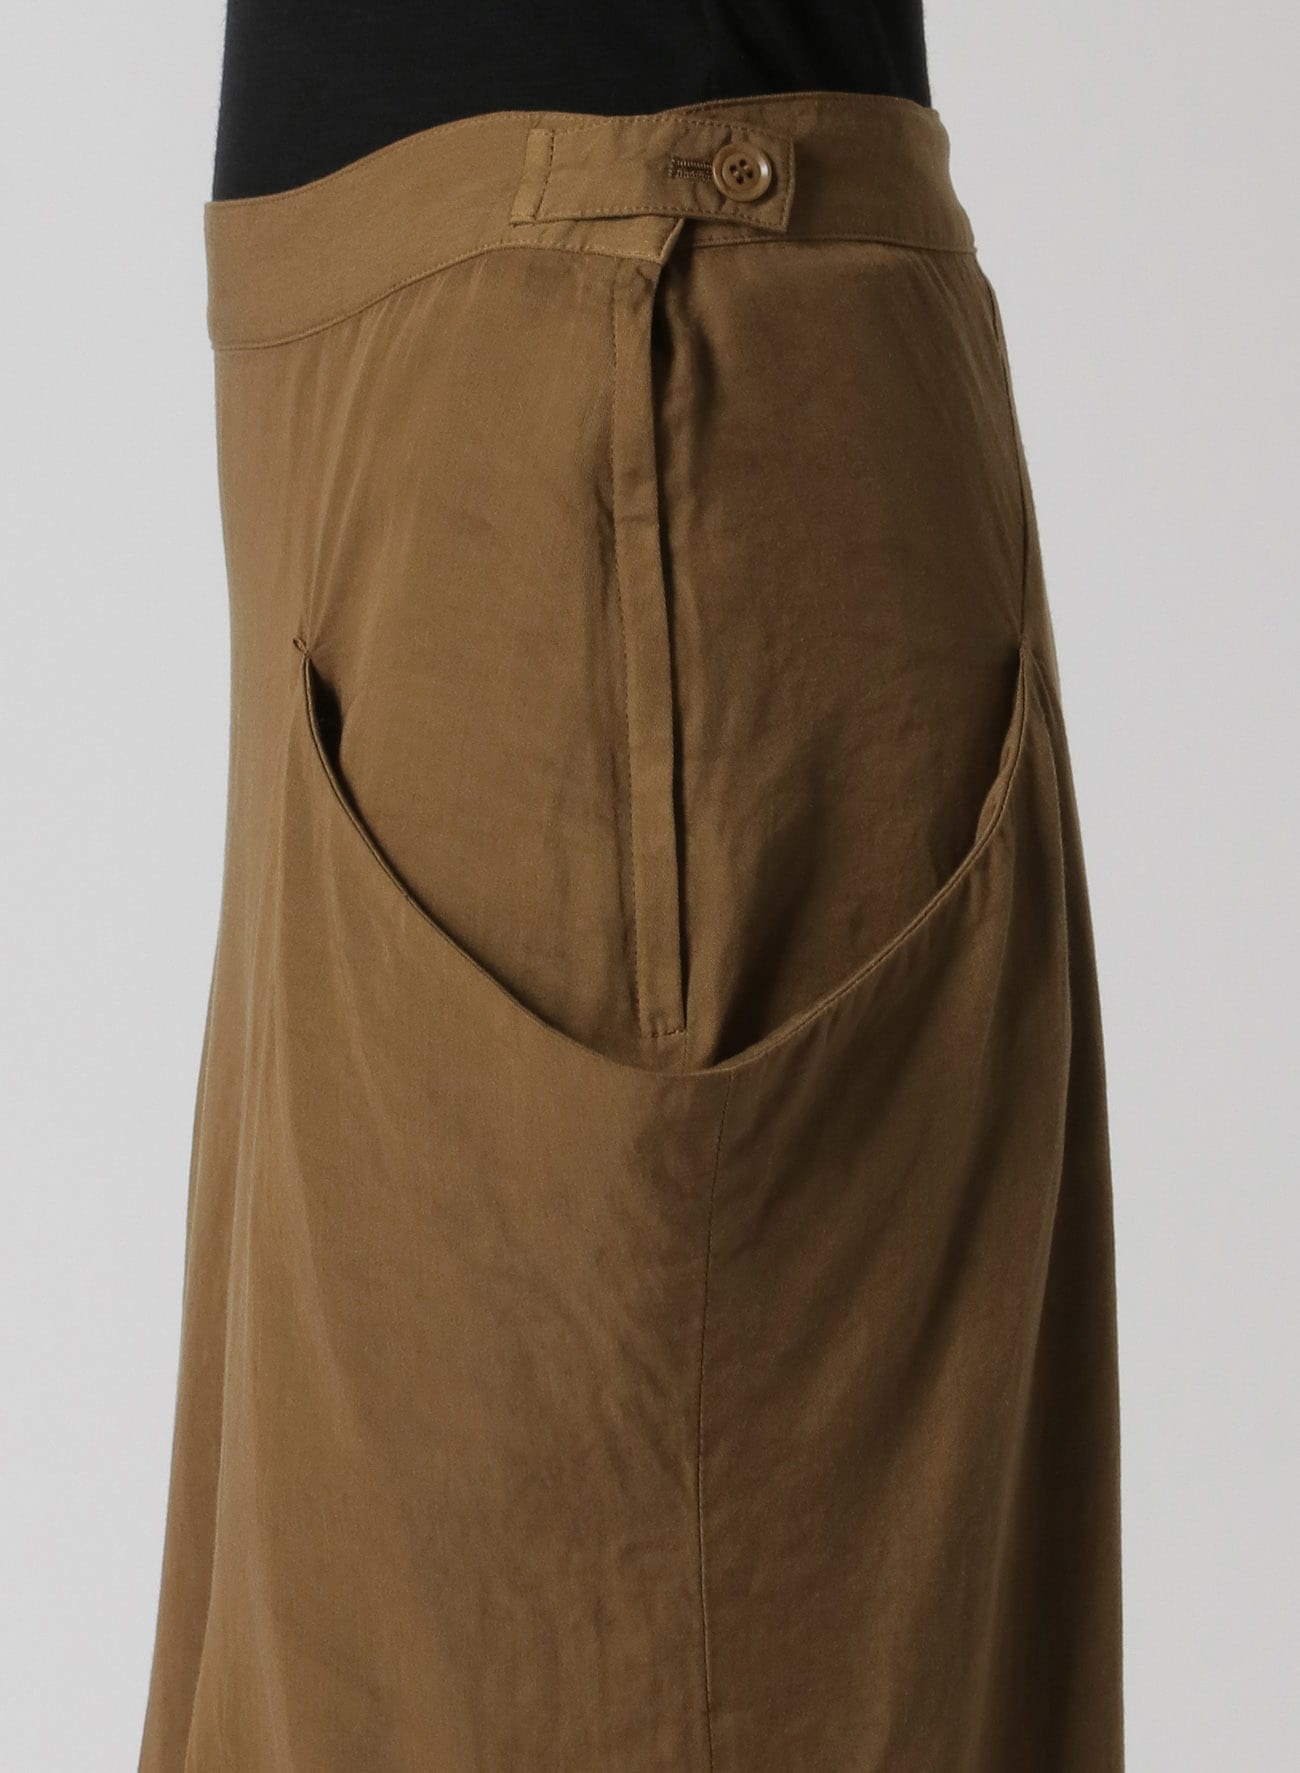 CELLULOSE TWILL GARMENT-DYED LONG POCKET SKIRT